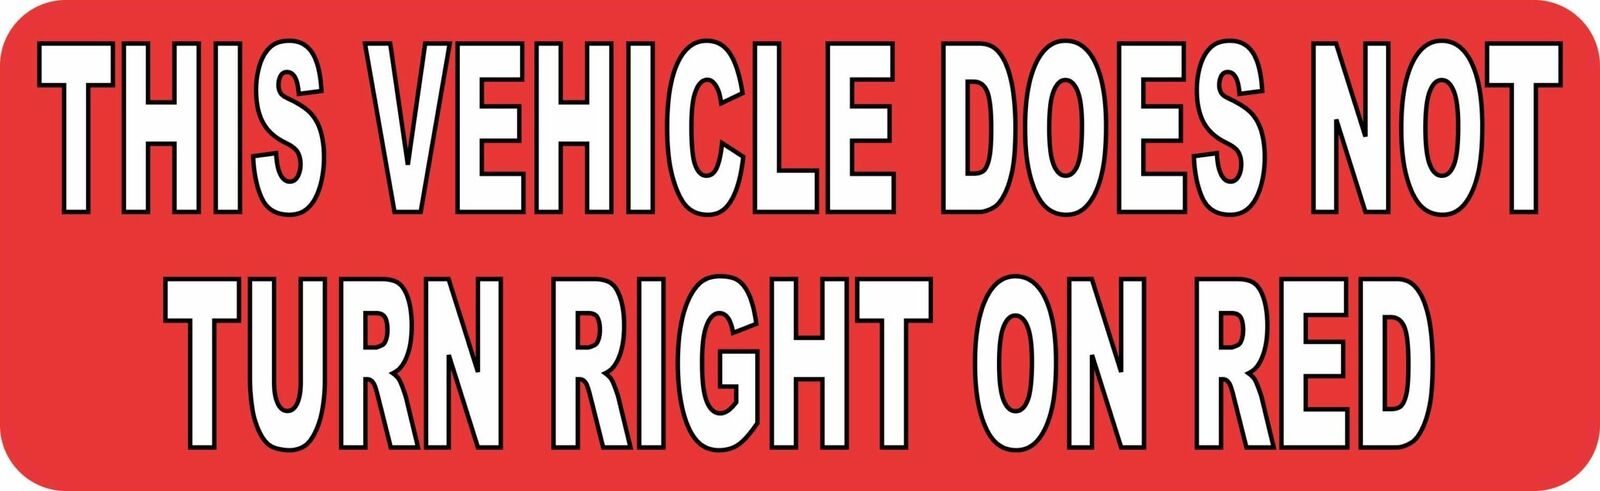 10in x 3in This Vehicle Does Not Turn Right on Red Vinyl Sticker Bumper Decal